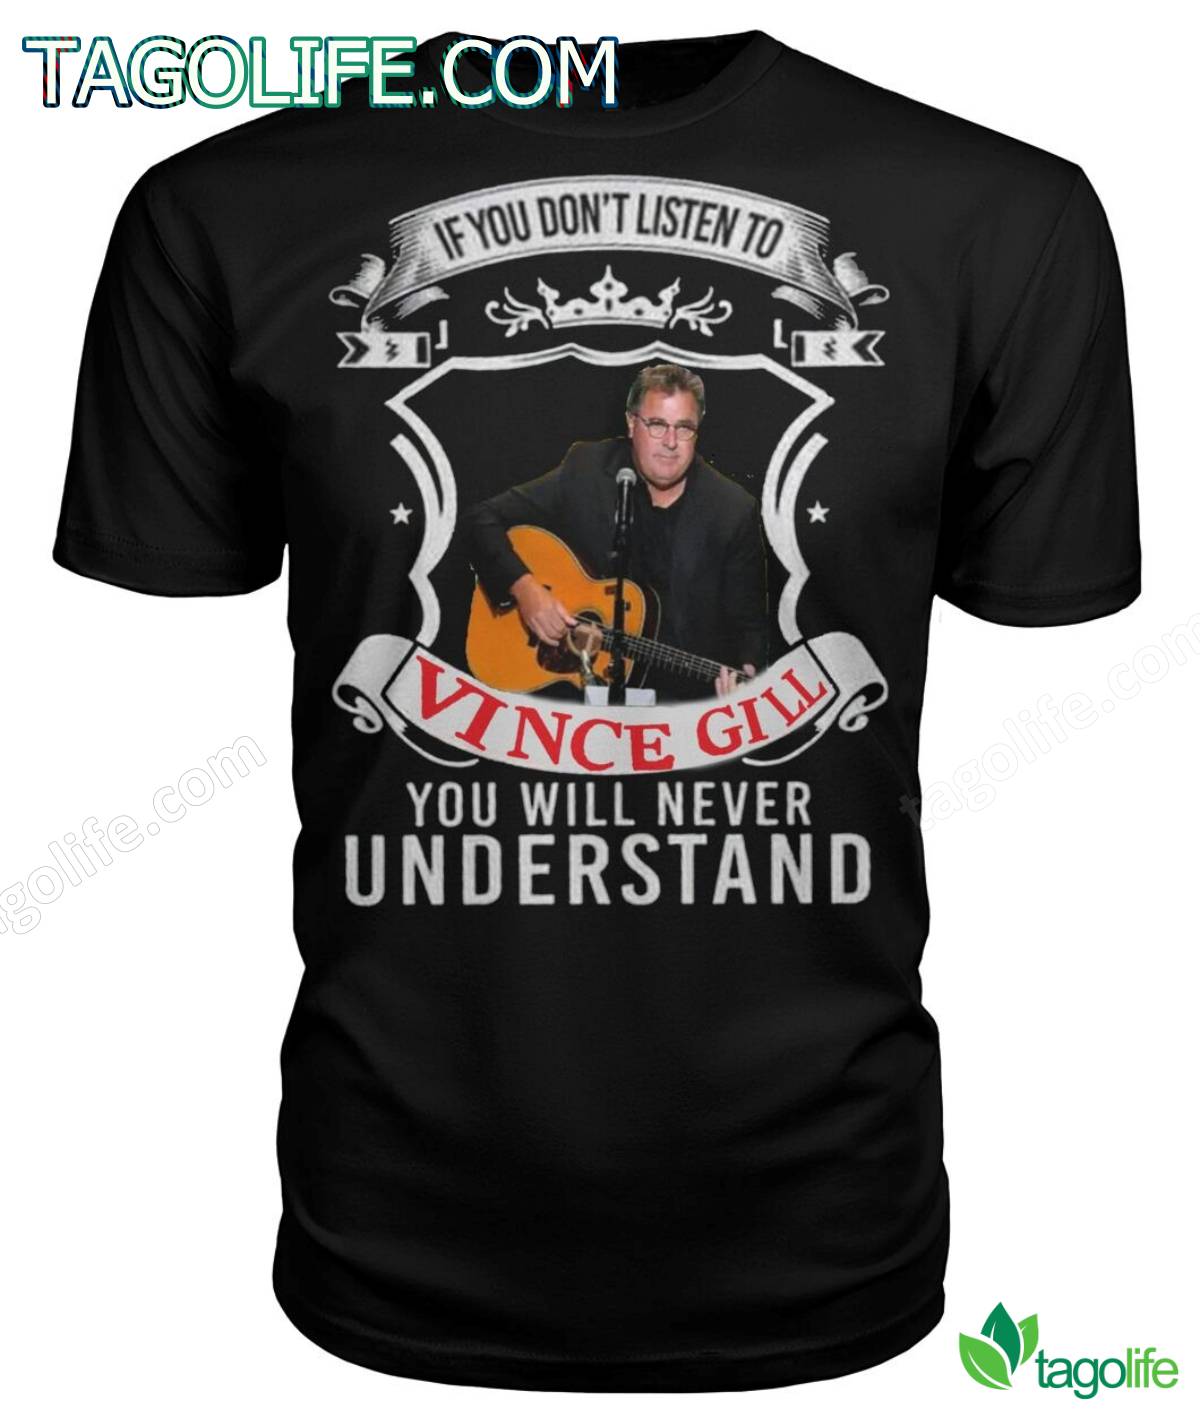 If You Don't Listen To Vince Gill You Will Never Understand Shirt, Tank Top